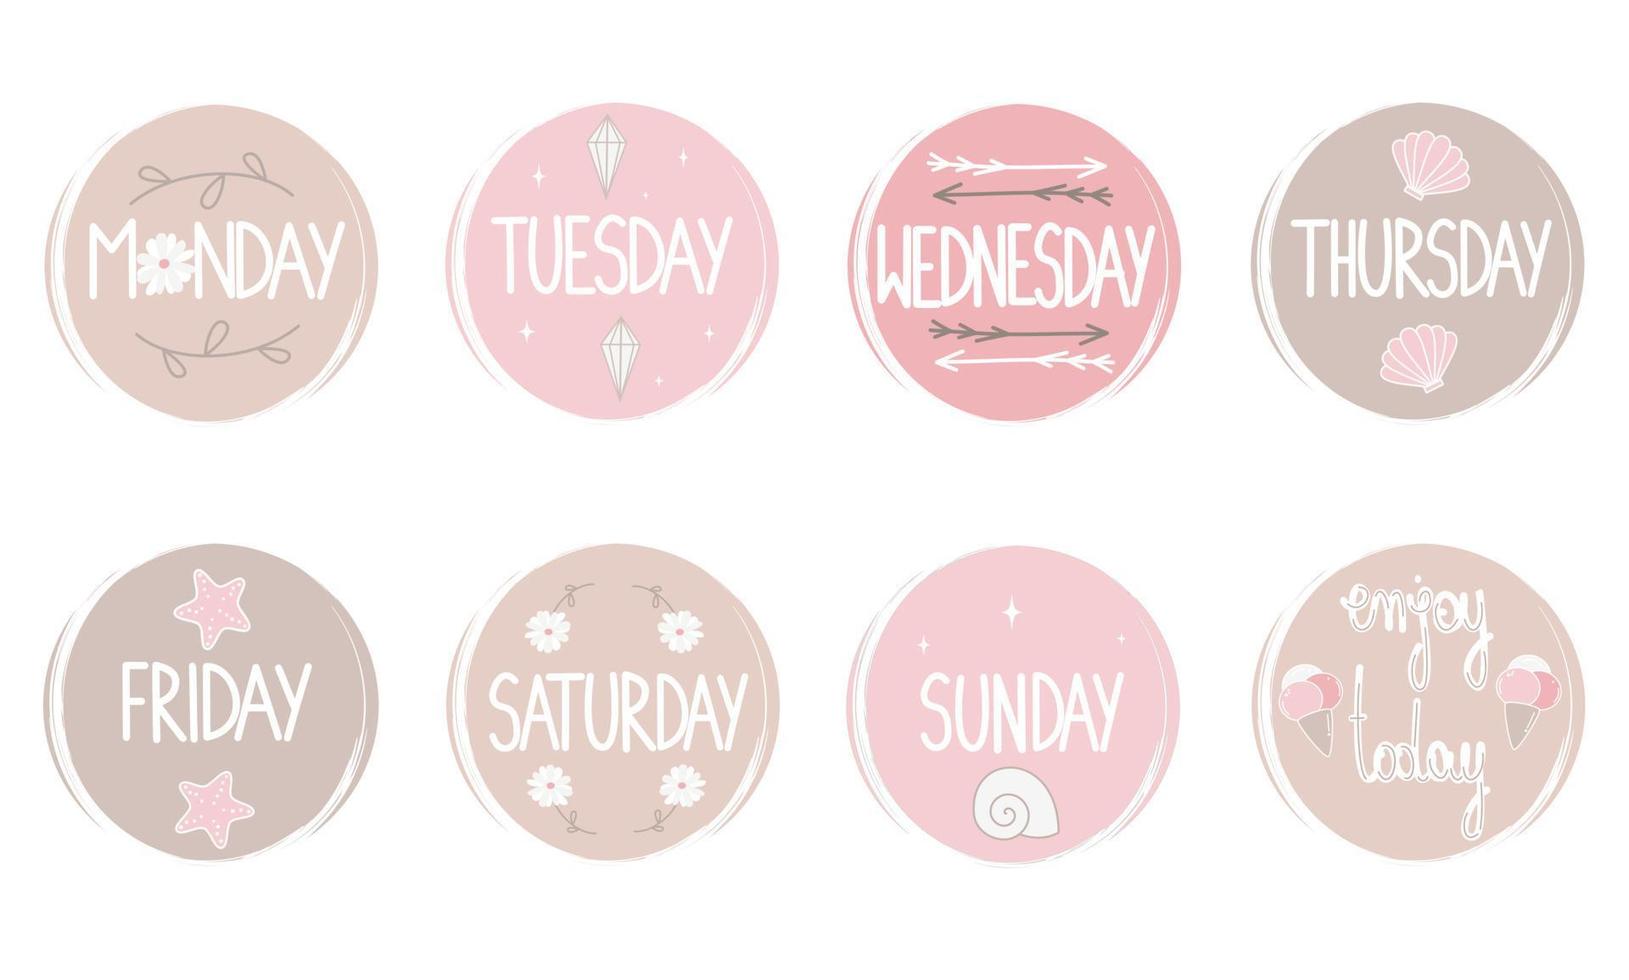 cute vector set of logo design templates, icons and badges for social media highlight in boho style with days of the week